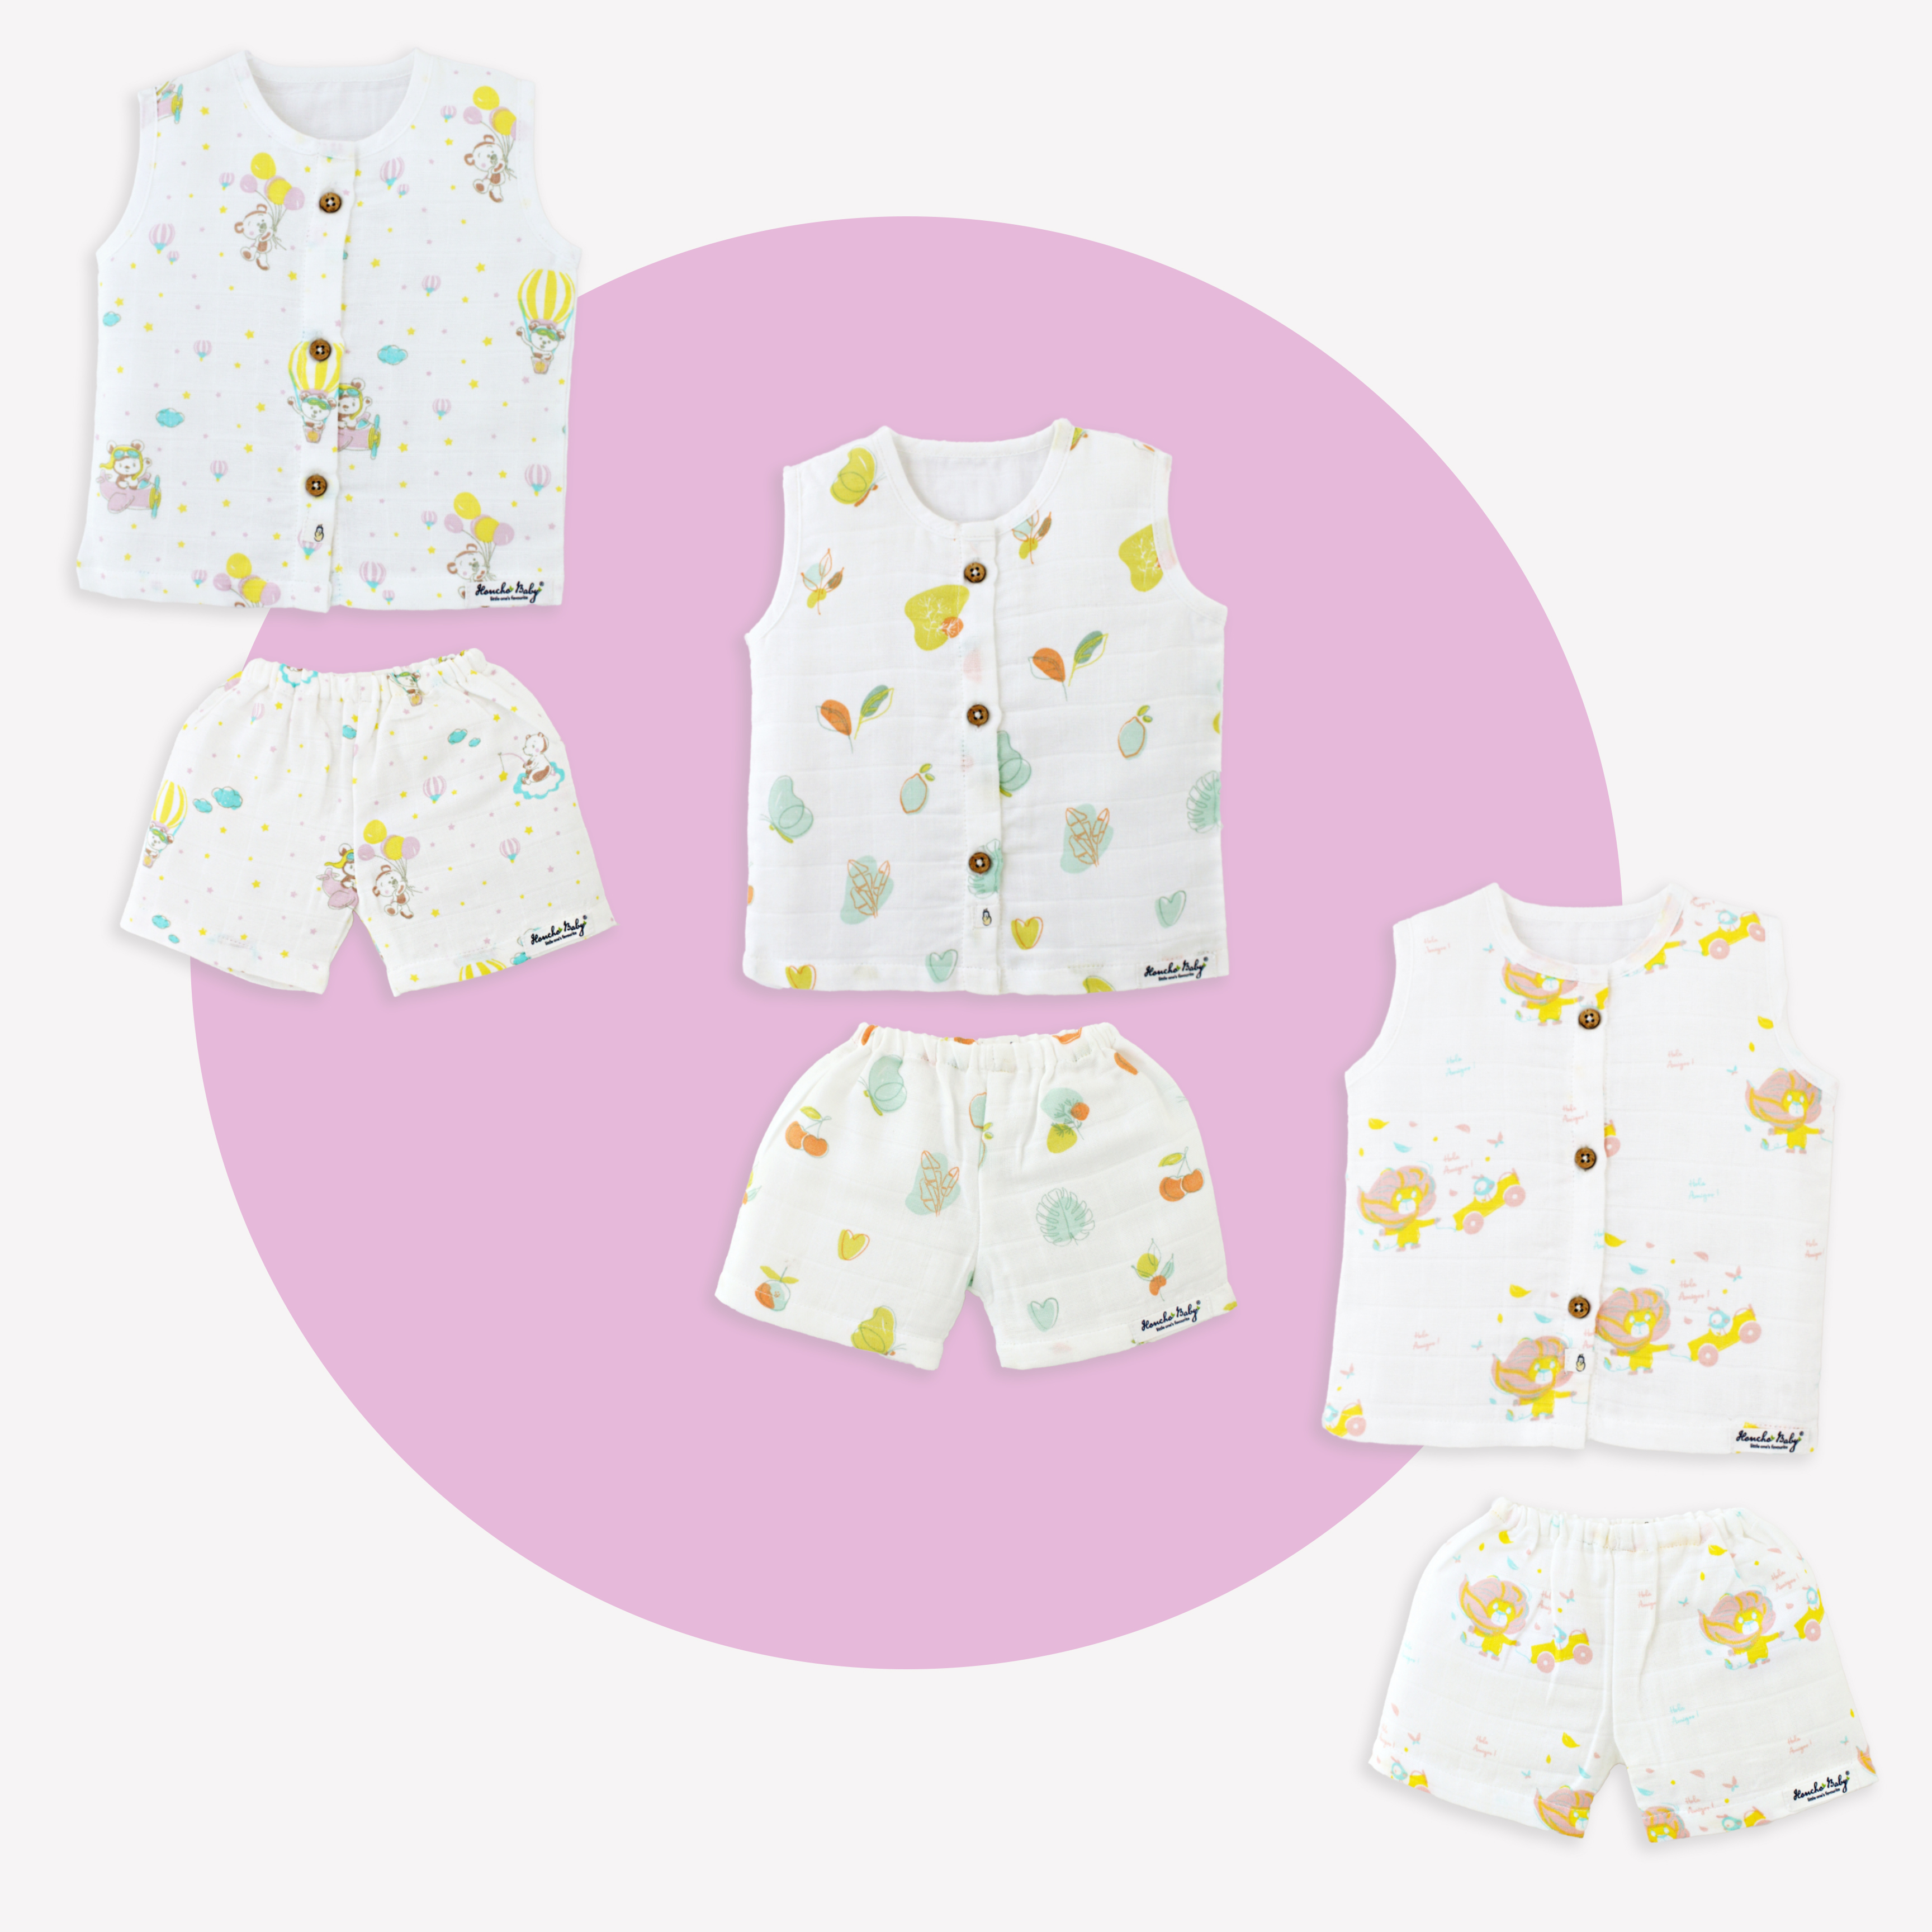 New Muslin Unisex Daily Wear - (Jabals - 3 & Shorts - 3 ) 0 - 3 year - Assorted Pack of 6